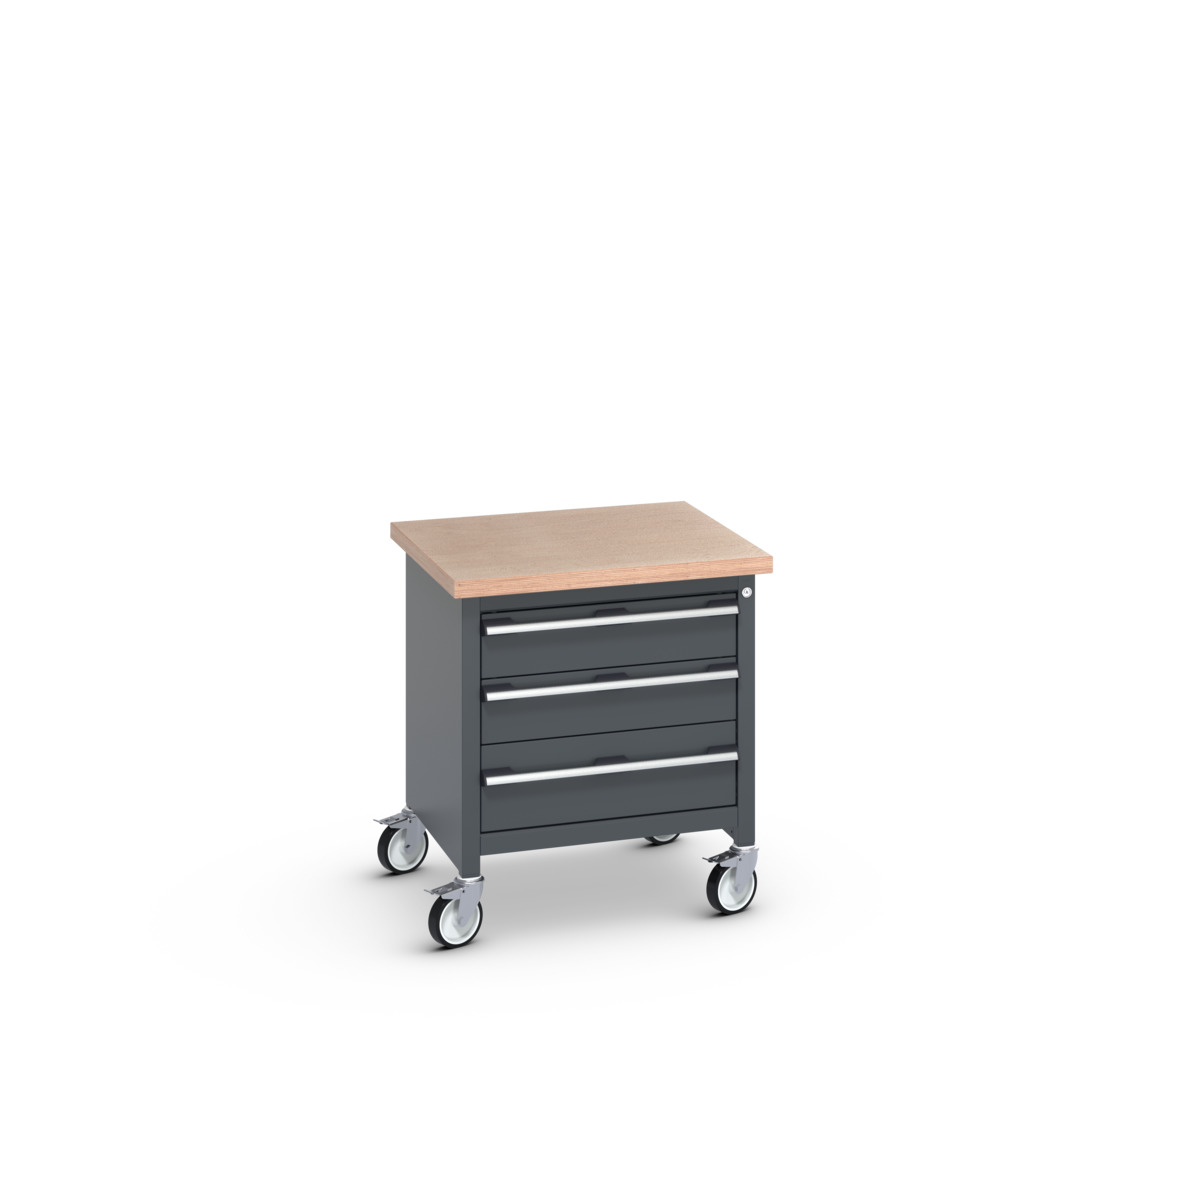 41002091.77V - cubio mobile storage bench (mpx)